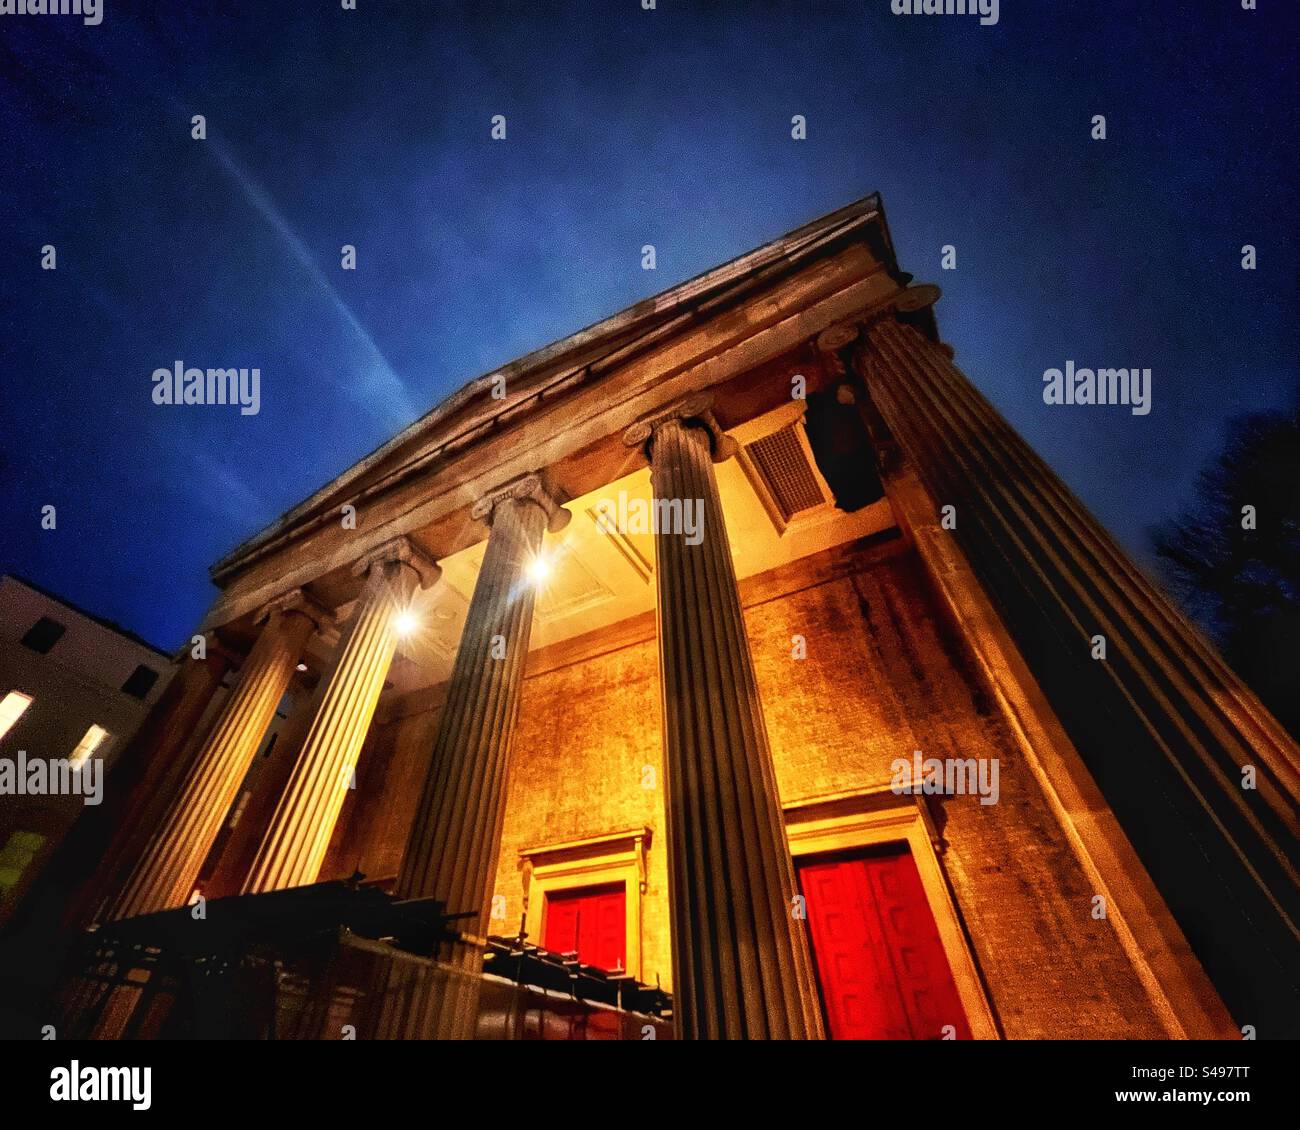 St Peter's Church, Eaton Square, London, SW1. Is a neoclassical building designed by the architect Henry Hakewill with a hexastyle portico with Ionic columns and a clock tower.Here at nightfall. Stock Photo